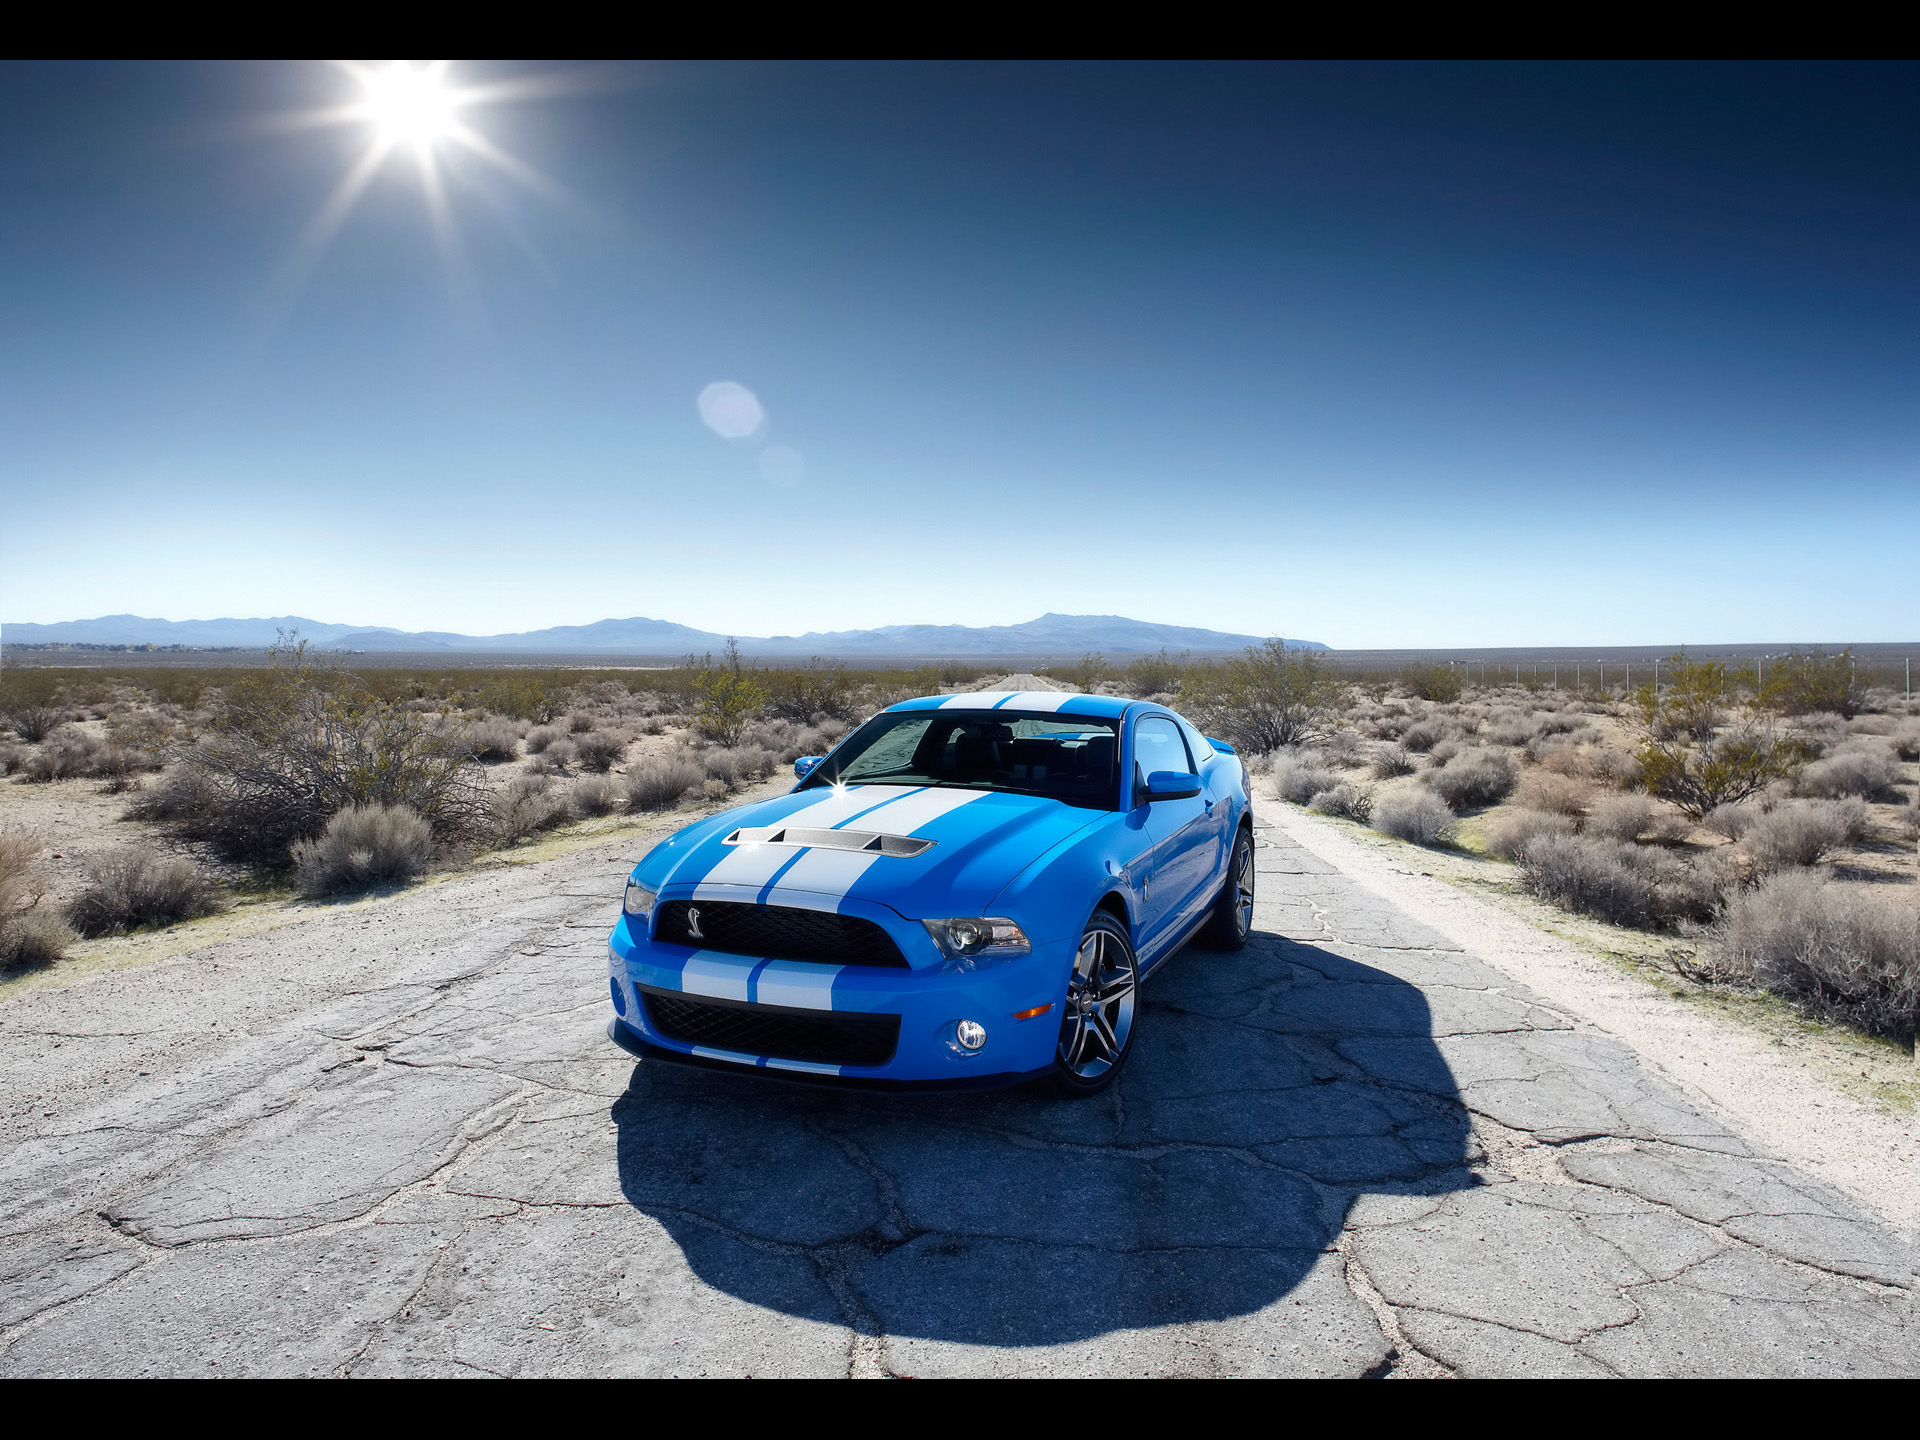 2010 Ford Mustang Shelby Gt500 Hd - HD Wallpaper 